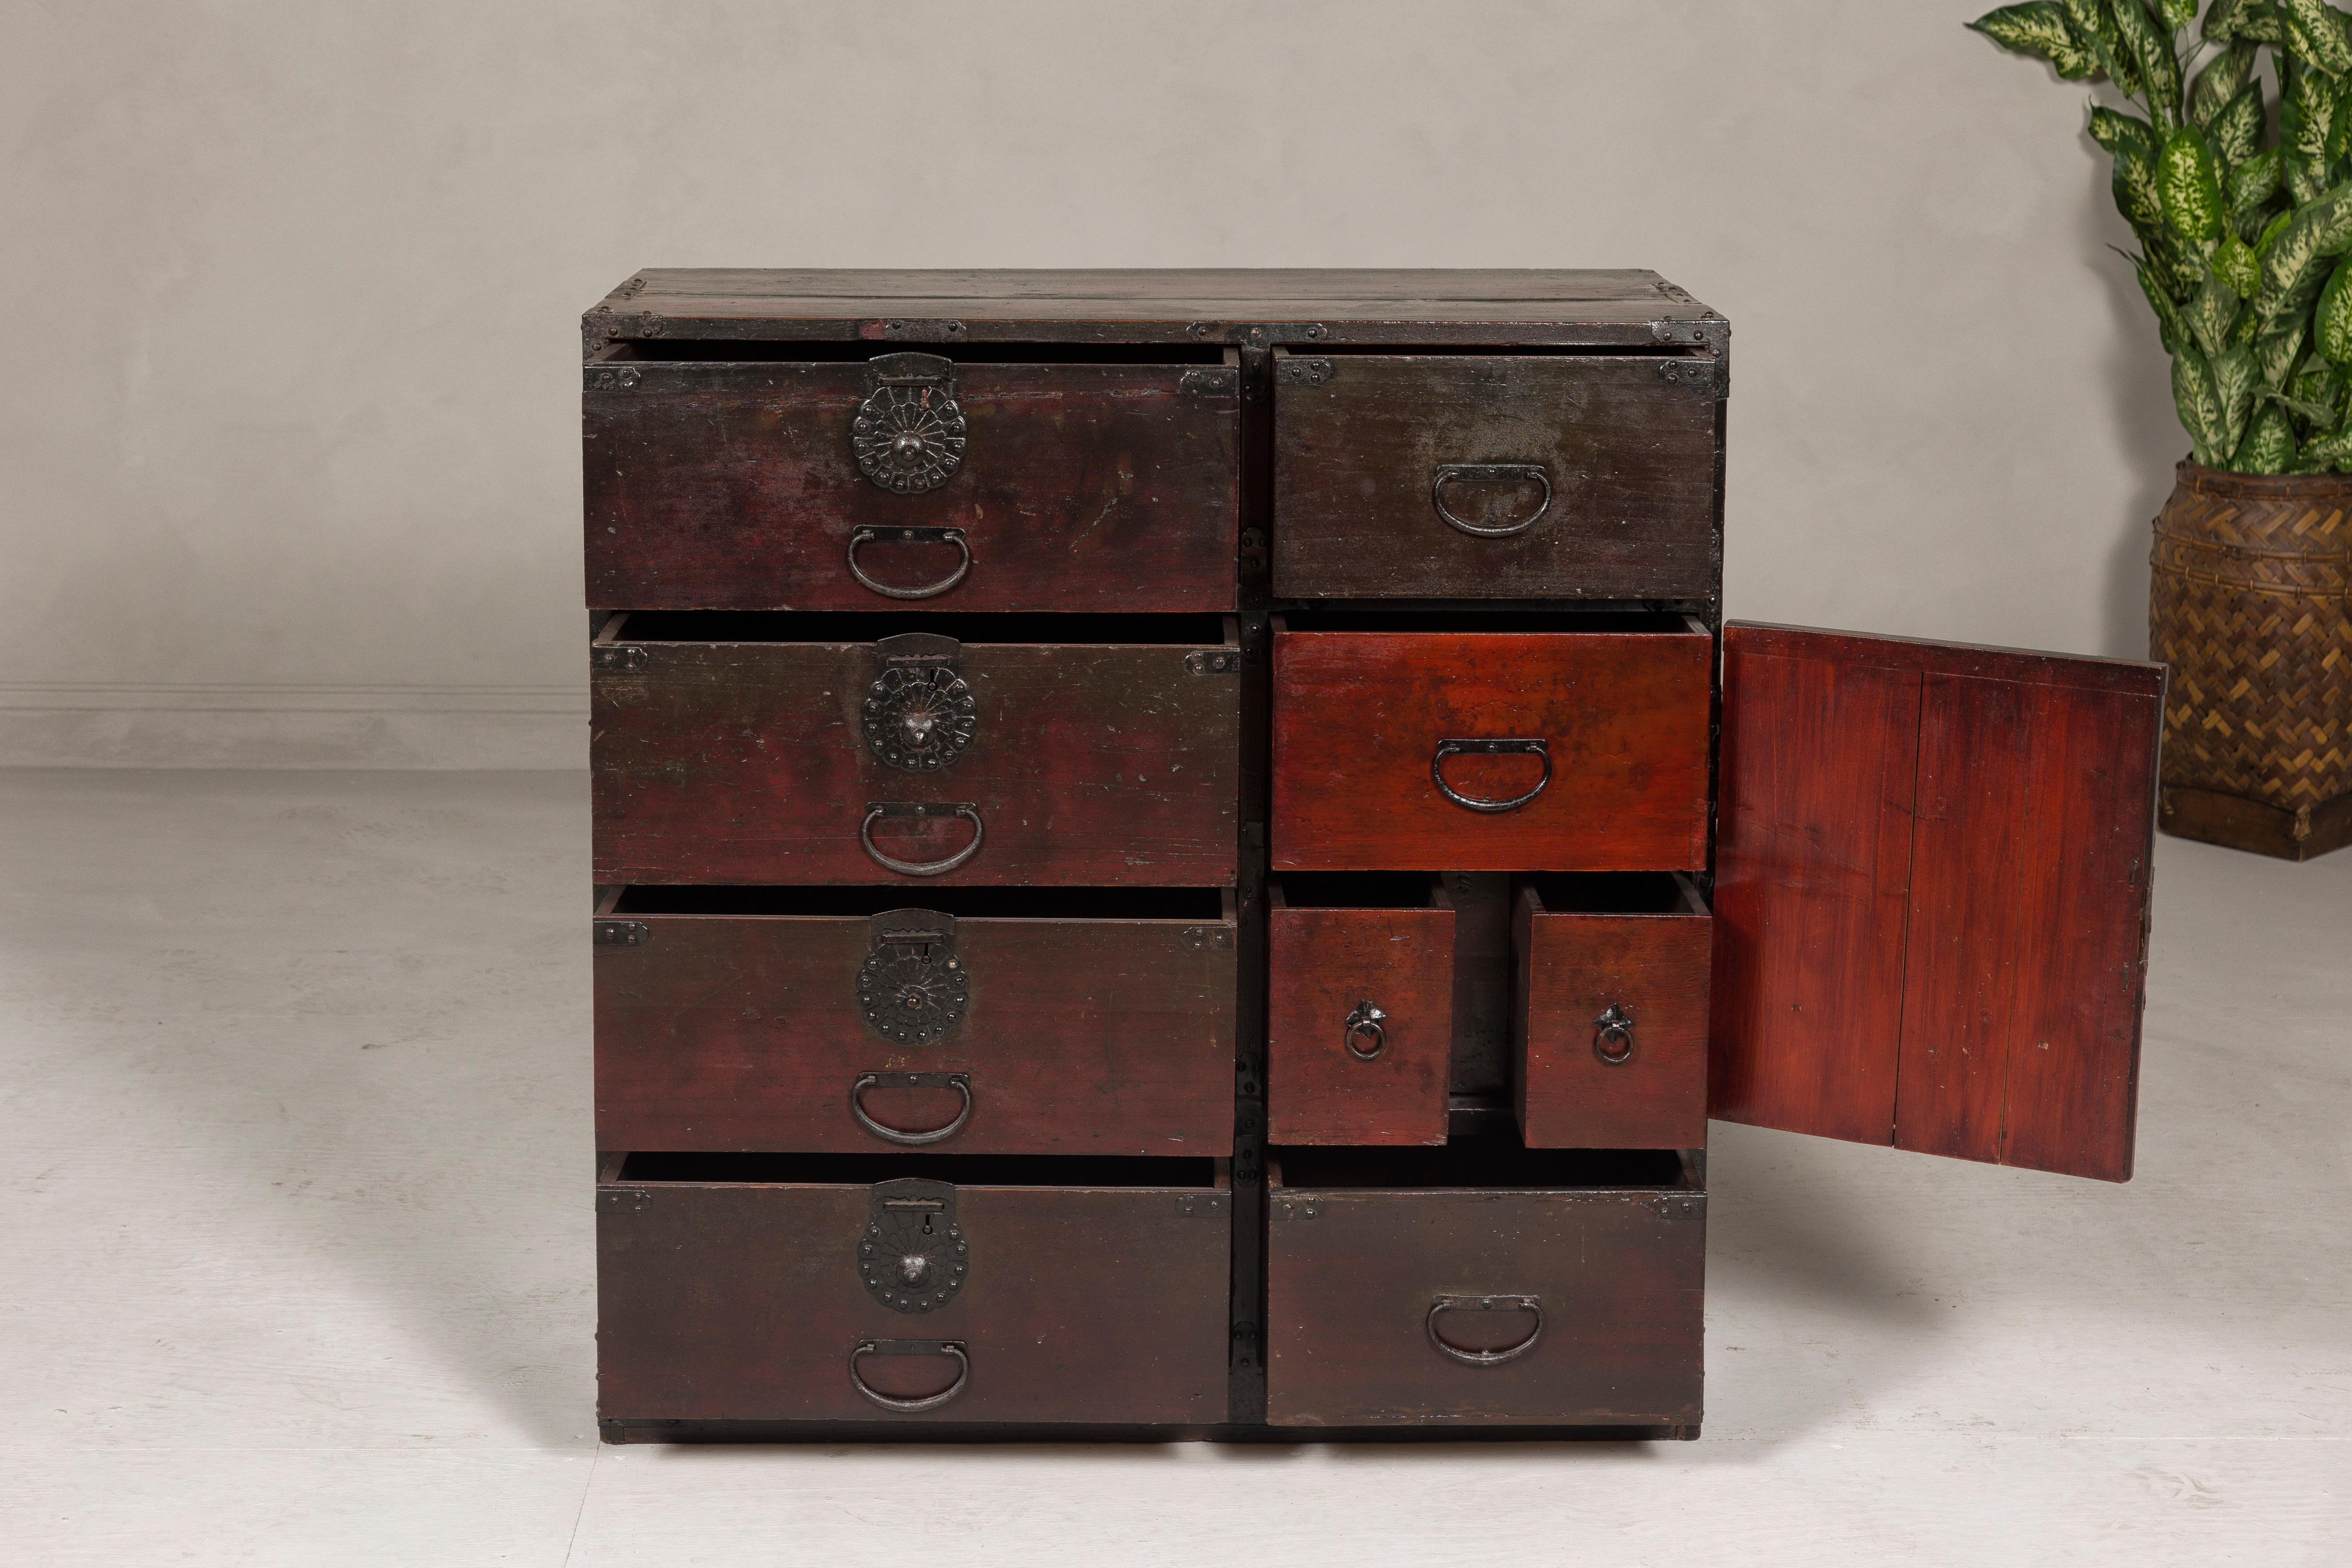 Japanese Meiji Period 19th Century Sendai Type Tansu Chest with Drawers and Safe For Sale 8